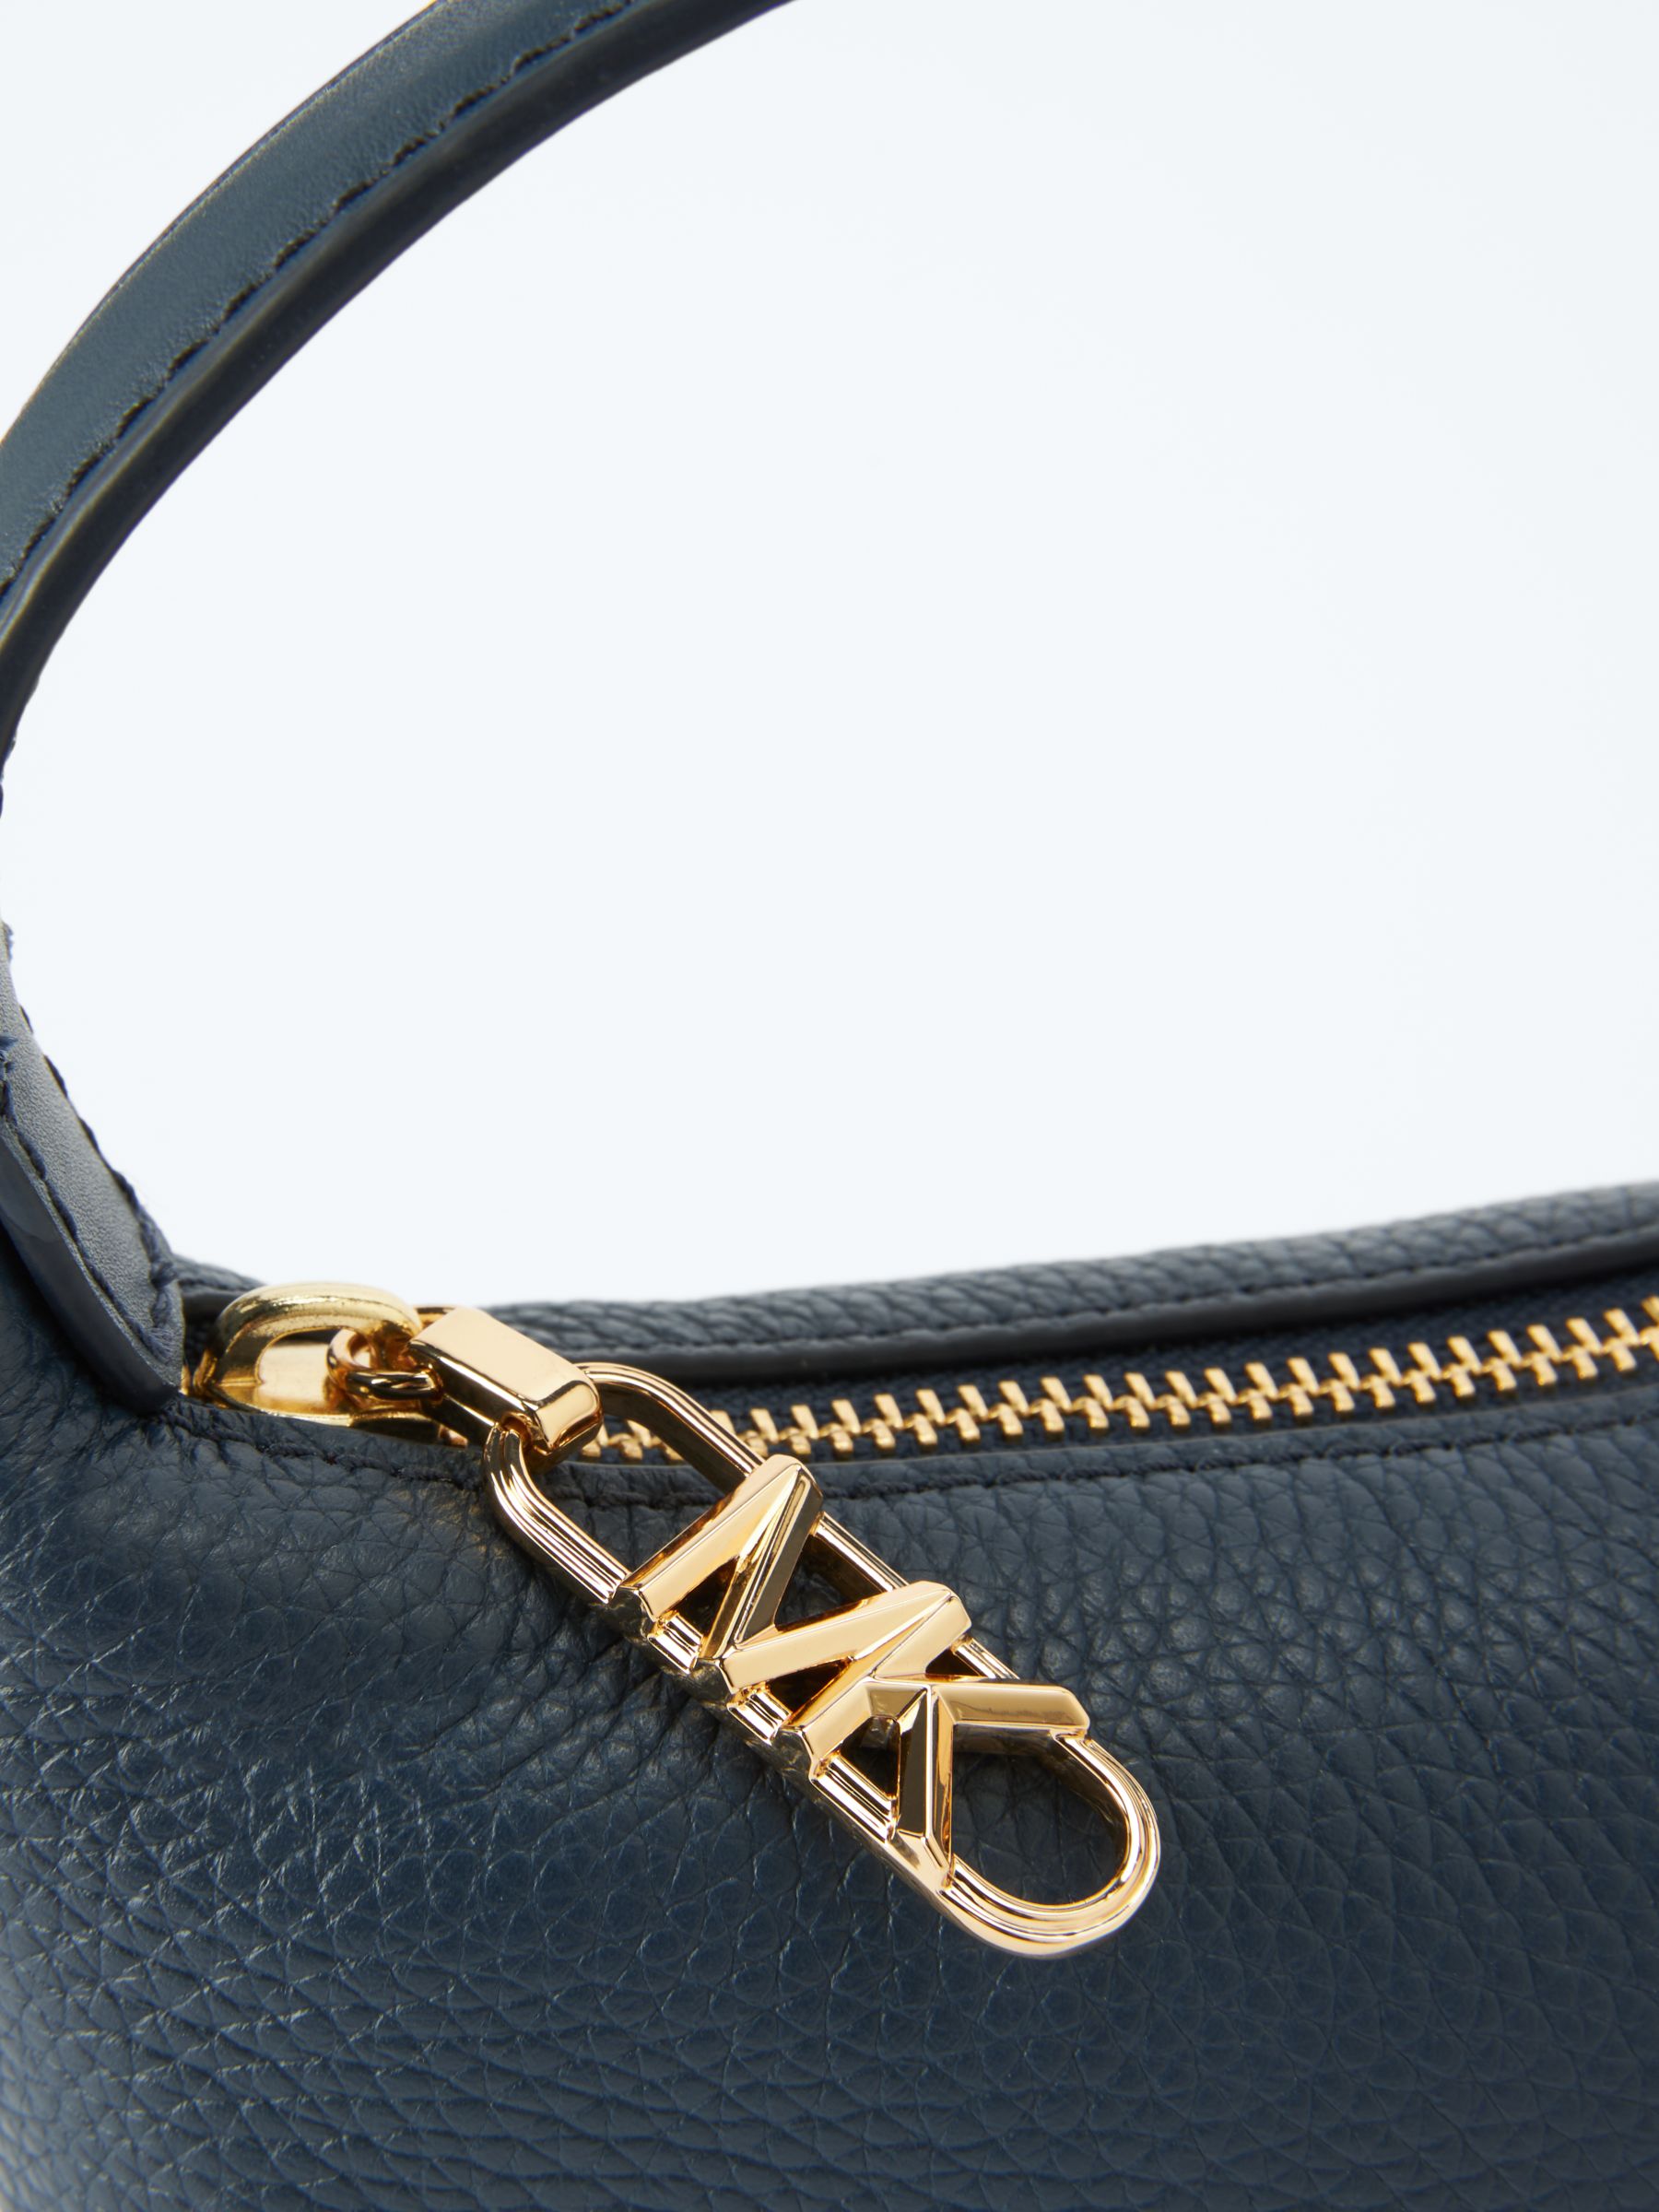 Buy Michael Kors Wythe Small Leather Crossbody Bag Online at johnlewis.com